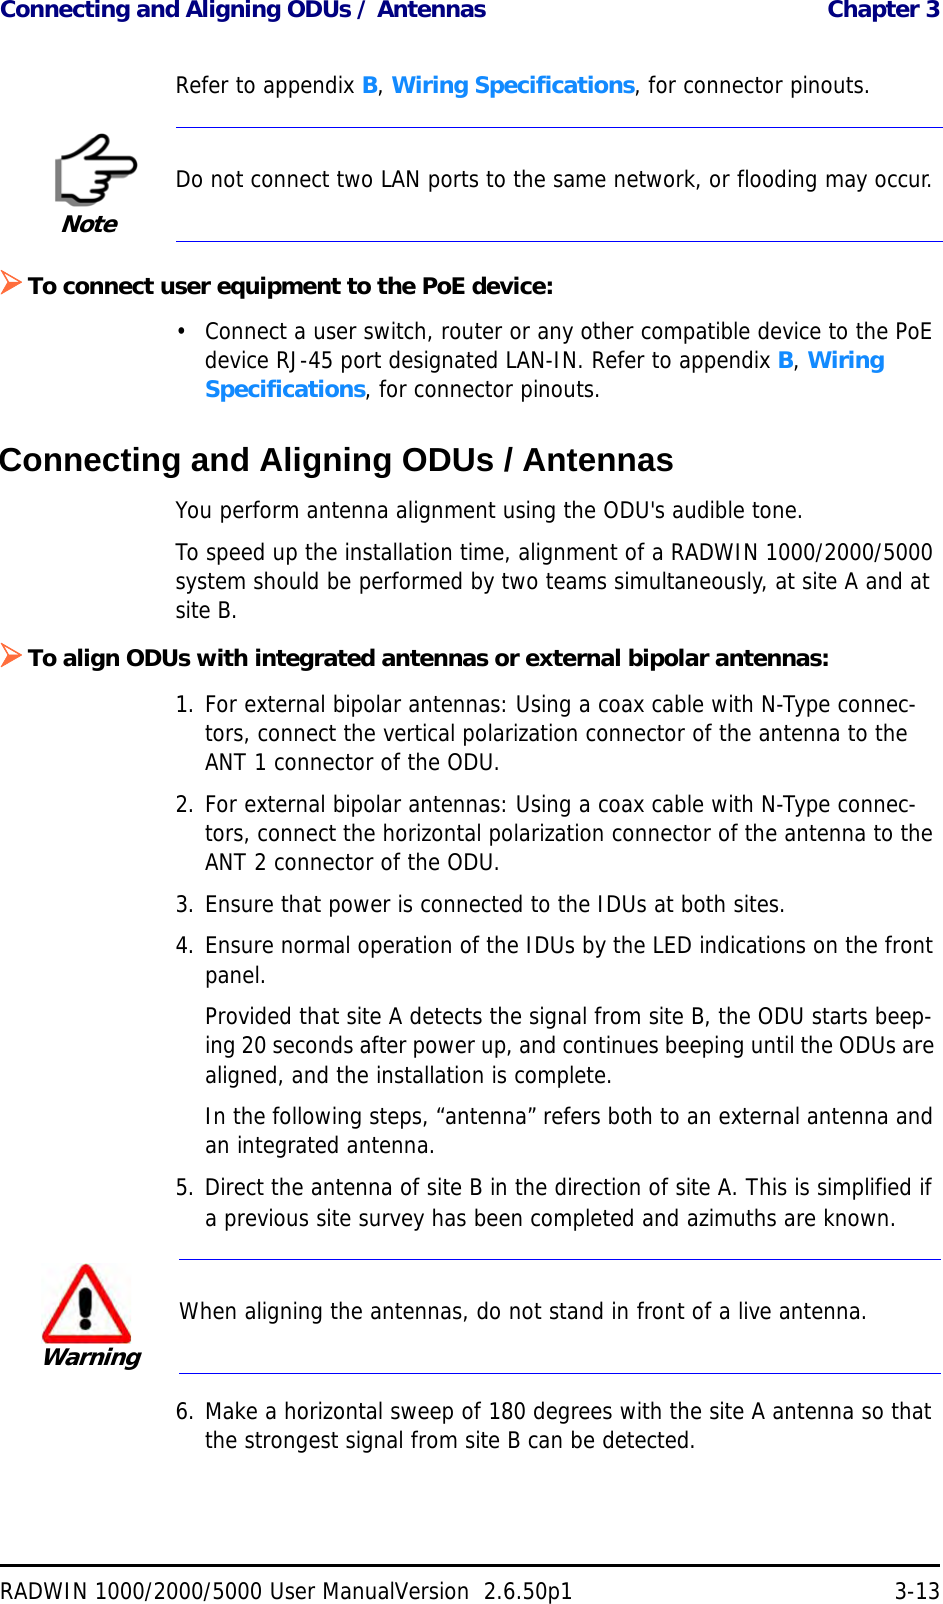 Connecting and Aligning ODUs / Antennas  Chapter 3RADWIN 1000/2000/5000 User ManualVersion  2.6.50p1 3-13Refer to appendix B, Wiring Specifications, for connector pinouts.To connect user equipment to the PoE device:• Connect a user switch, router or any other compatible device to the PoE device RJ-45 port designated LAN-IN. Refer to appendix B, Wiring Specifications, for connector pinouts.Connecting and Aligning ODUs / AntennasYou perform antenna alignment using the ODU&apos;s audible tone.To speed up the installation time, alignment of a RADWIN 1000/2000/5000 system should be performed by two teams simultaneously, at site A and at site B.To align ODUs with integrated antennas or external bipolar antennas:1. For external bipolar antennas: Using a coax cable with N-Type connec-tors, connect the vertical polarization connector of the antenna to the ANT 1 connector of the ODU.2. For external bipolar antennas: Using a coax cable with N-Type connec-tors, connect the horizontal polarization connector of the antenna to the ANT 2 connector of the ODU.3. Ensure that power is connected to the IDUs at both sites.4. Ensure normal operation of the IDUs by the LED indications on the front panel.Provided that site A detects the signal from site B, the ODU starts beep-ing 20 seconds after power up, and continues beeping until the ODUs are aligned, and the installation is complete.In the following steps, “antenna” refers both to an external antenna and an integrated antenna.5. Direct the antenna of site B in the direction of site A. This is simplified if a previous site survey has been completed and azimuths are known.6. Make a horizontal sweep of 180 degrees with the site A antenna so that the strongest signal from site B can be detected.NoteDo not connect two LAN ports to the same network, or flooding may occur.WarningWhen aligning the antennas, do not stand in front of a live antenna.